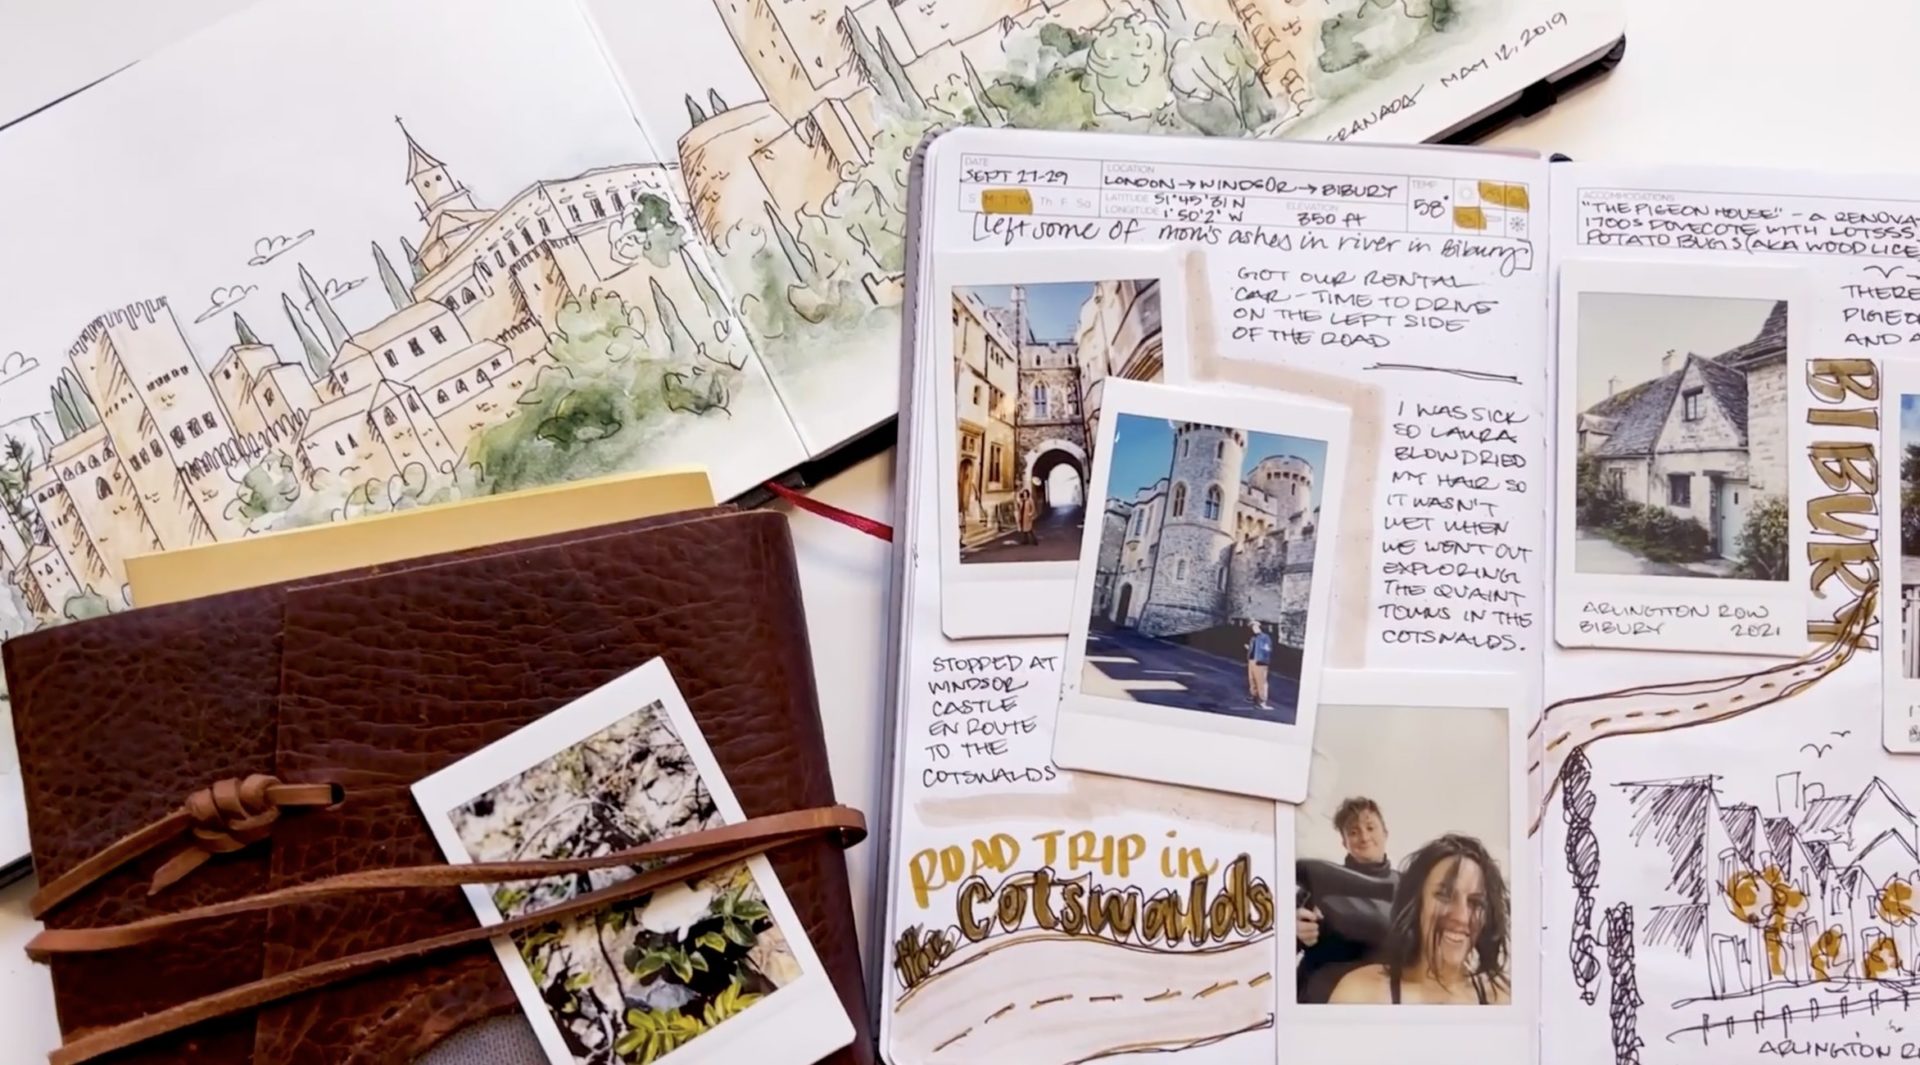 Several of teacher Peggy Dean’s journals lay open on a white backdrop. One features a two-page illustration of a town from a distance. The other includes Polaroid photos and journaling.